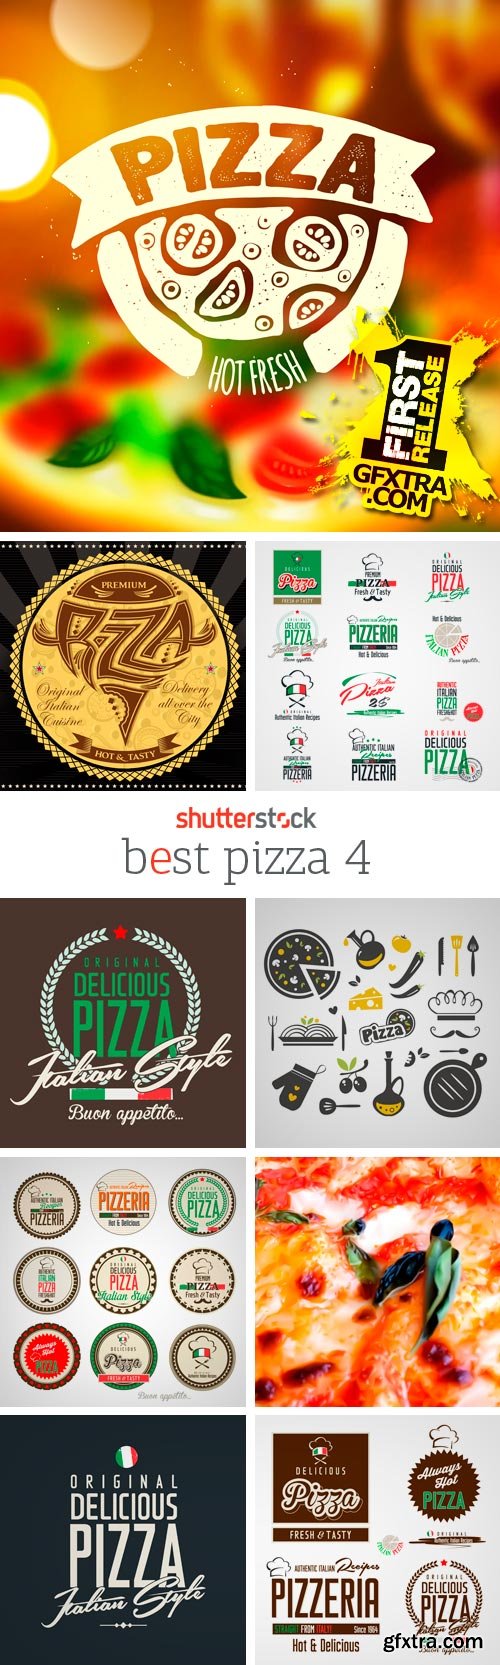 Best Pizza 4, 25xEPS